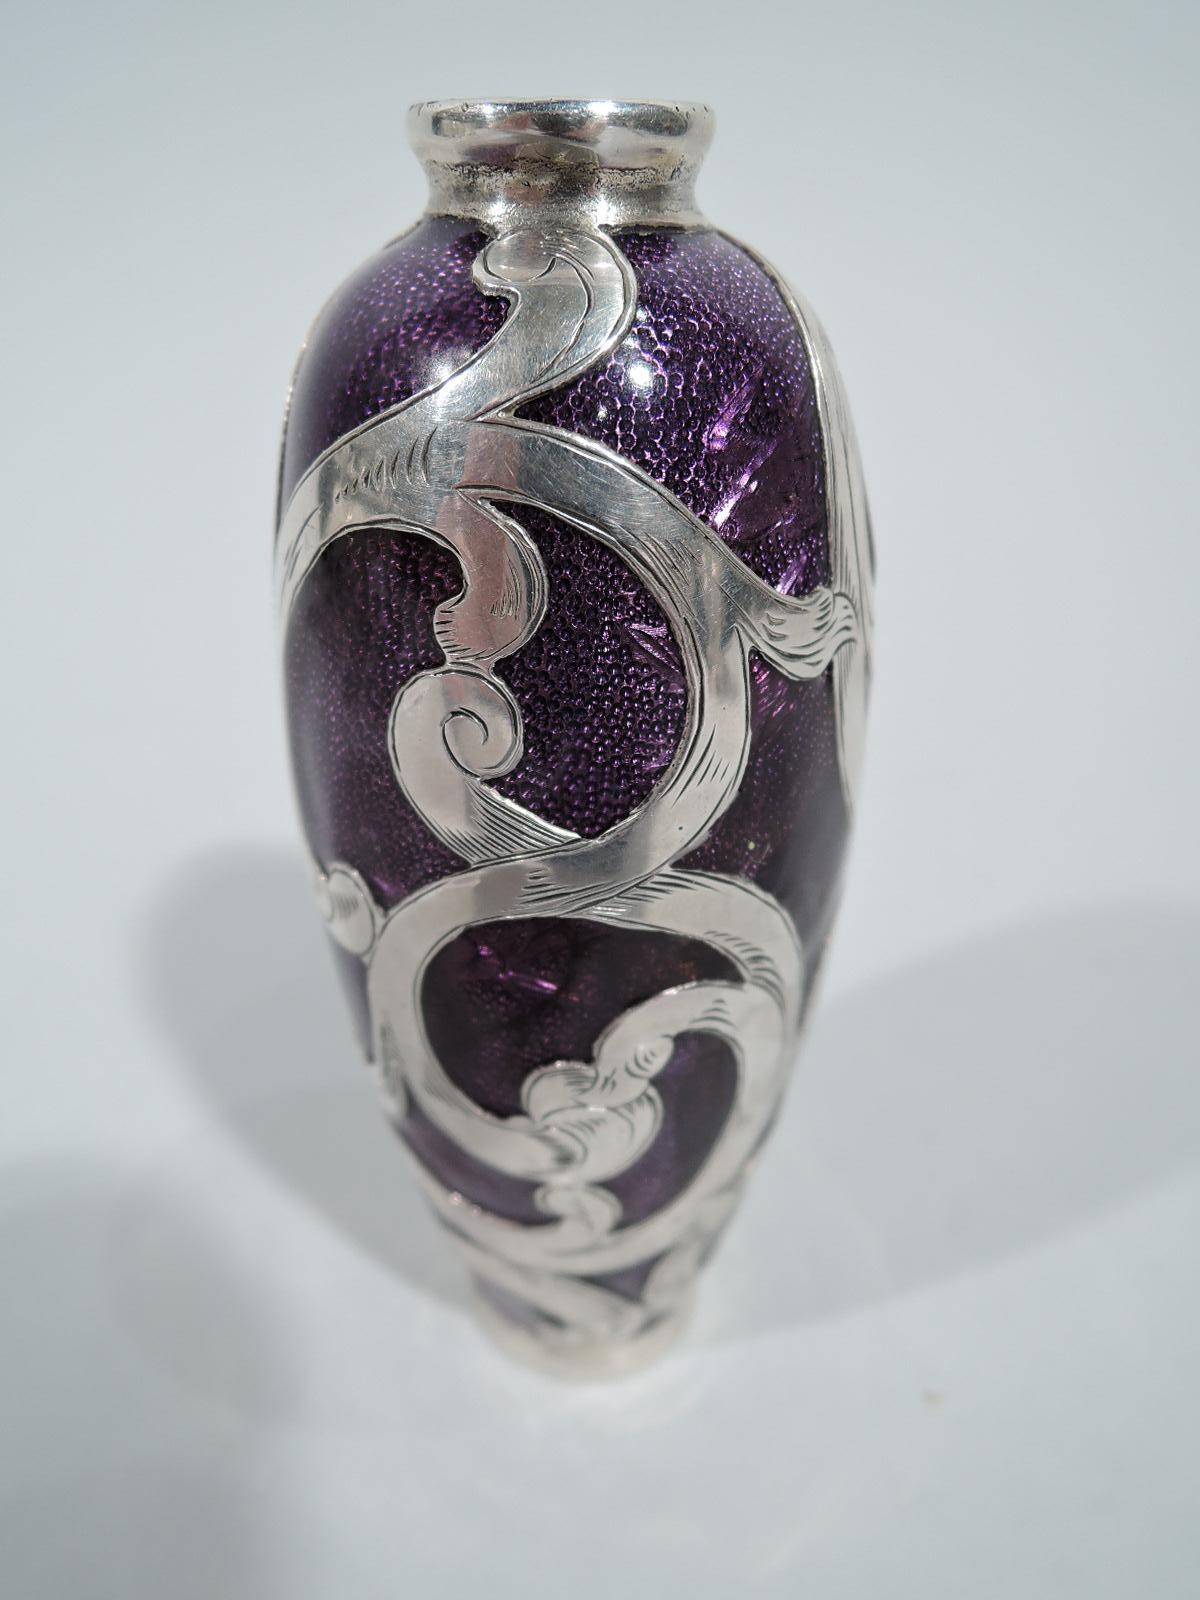 Turn-of-the-century American enamel bud vase with engraved silver overlay. Ovoid with foot ring and short neck in silver collars. Loose scroll overlay. Enamel is purple. Marked “Solid Silver”.